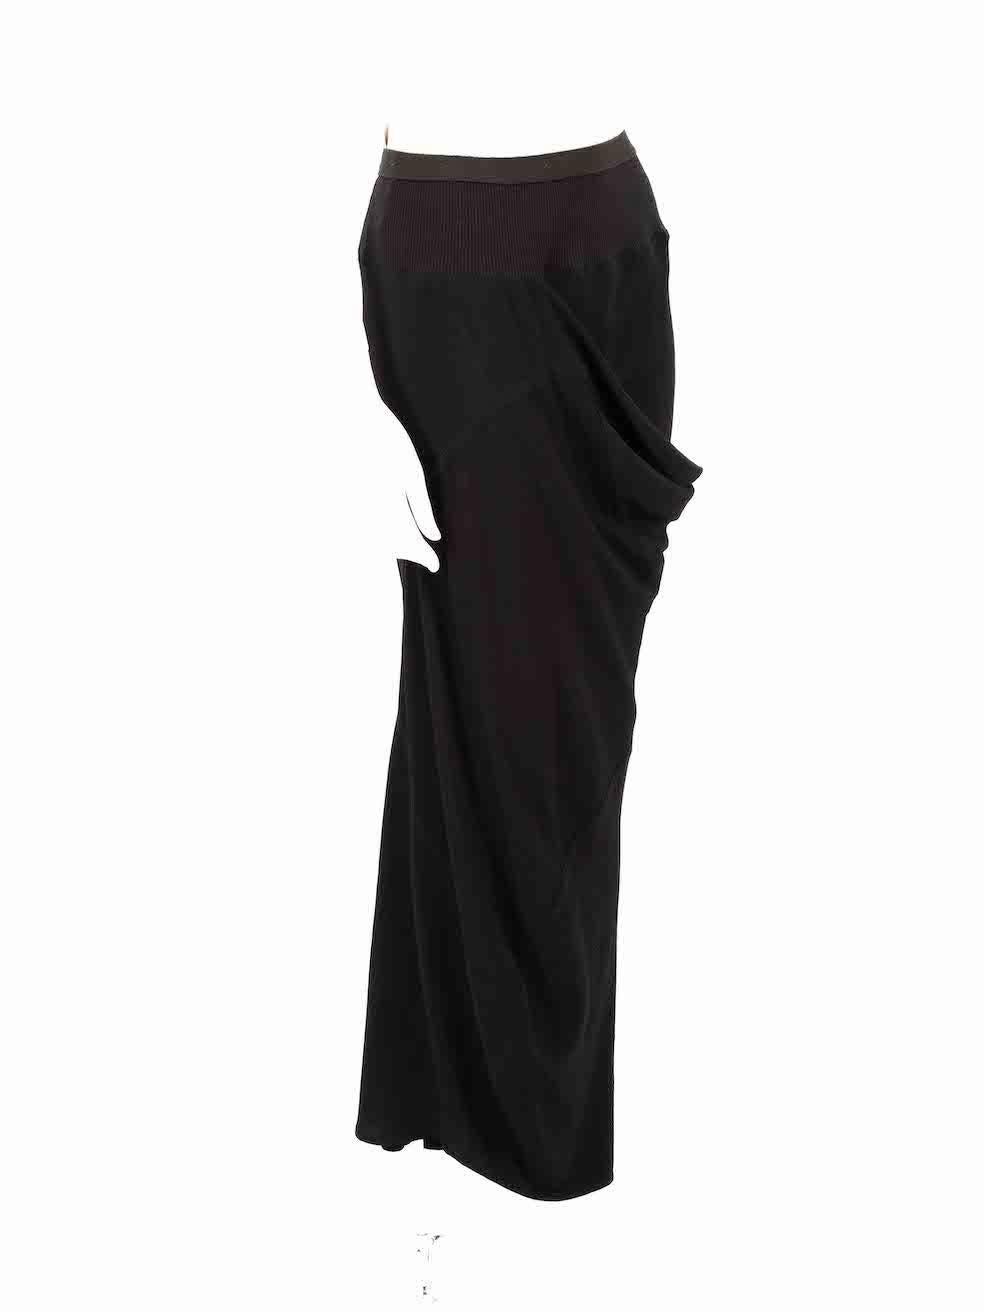 CONDITION is Very good. Hardly any visible wear to skirt is evident on this used Rick Owens designer resale item.
 
 
 
 Details
 
 
 AW 15
 
 Black
 
 Silk
 
 Midi skirt
 
 Asymmetric and drape accent
 
 Elasticated waistband
 
 Contrast panel
 
 
